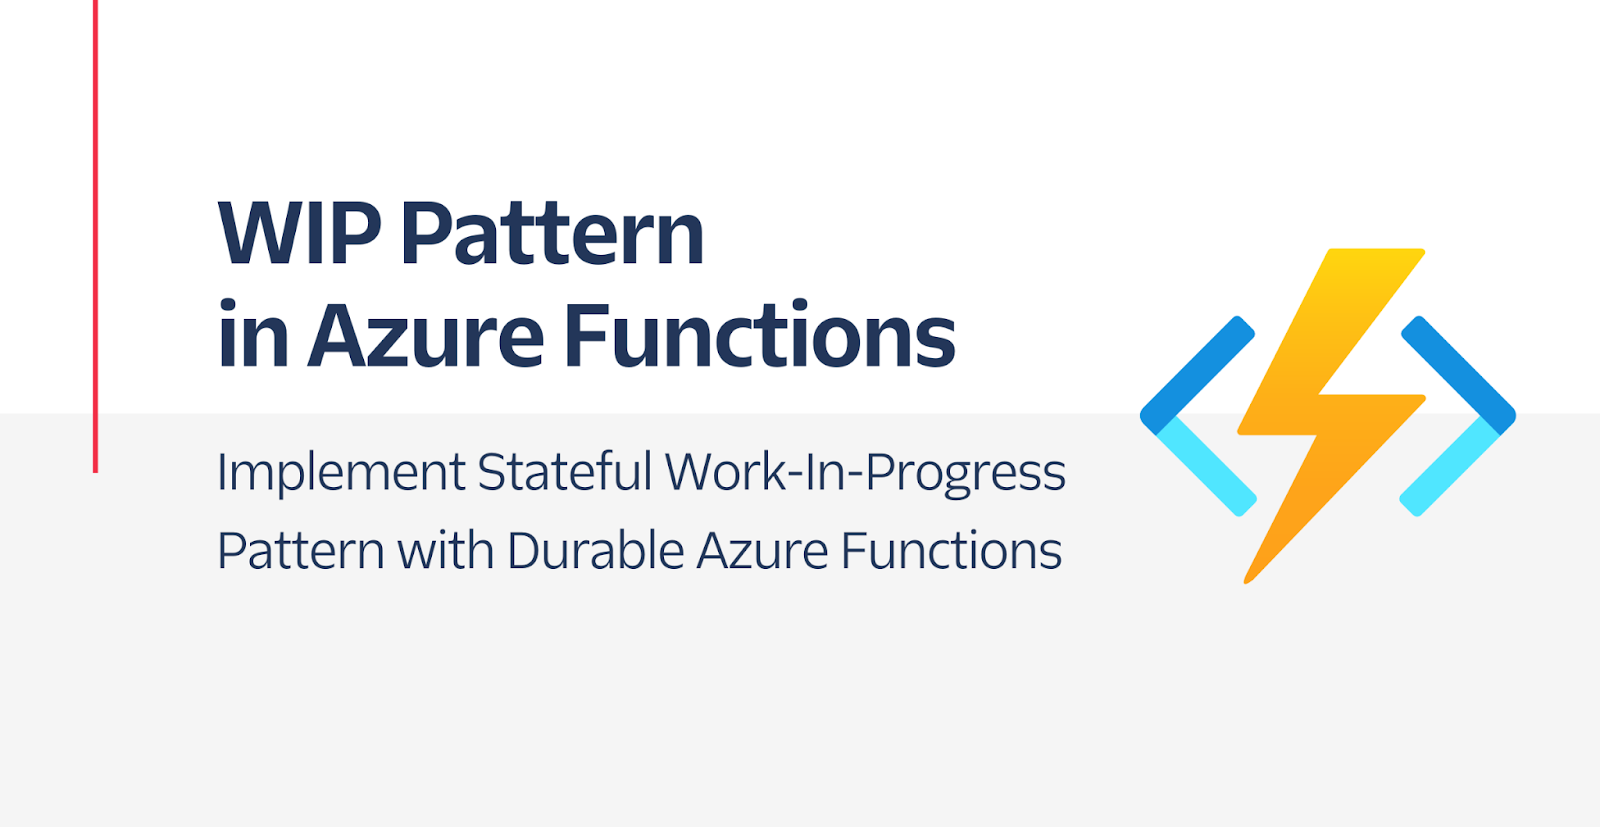 Implement Stateful Work-In-Progress Pattern with Durable Azure Functions